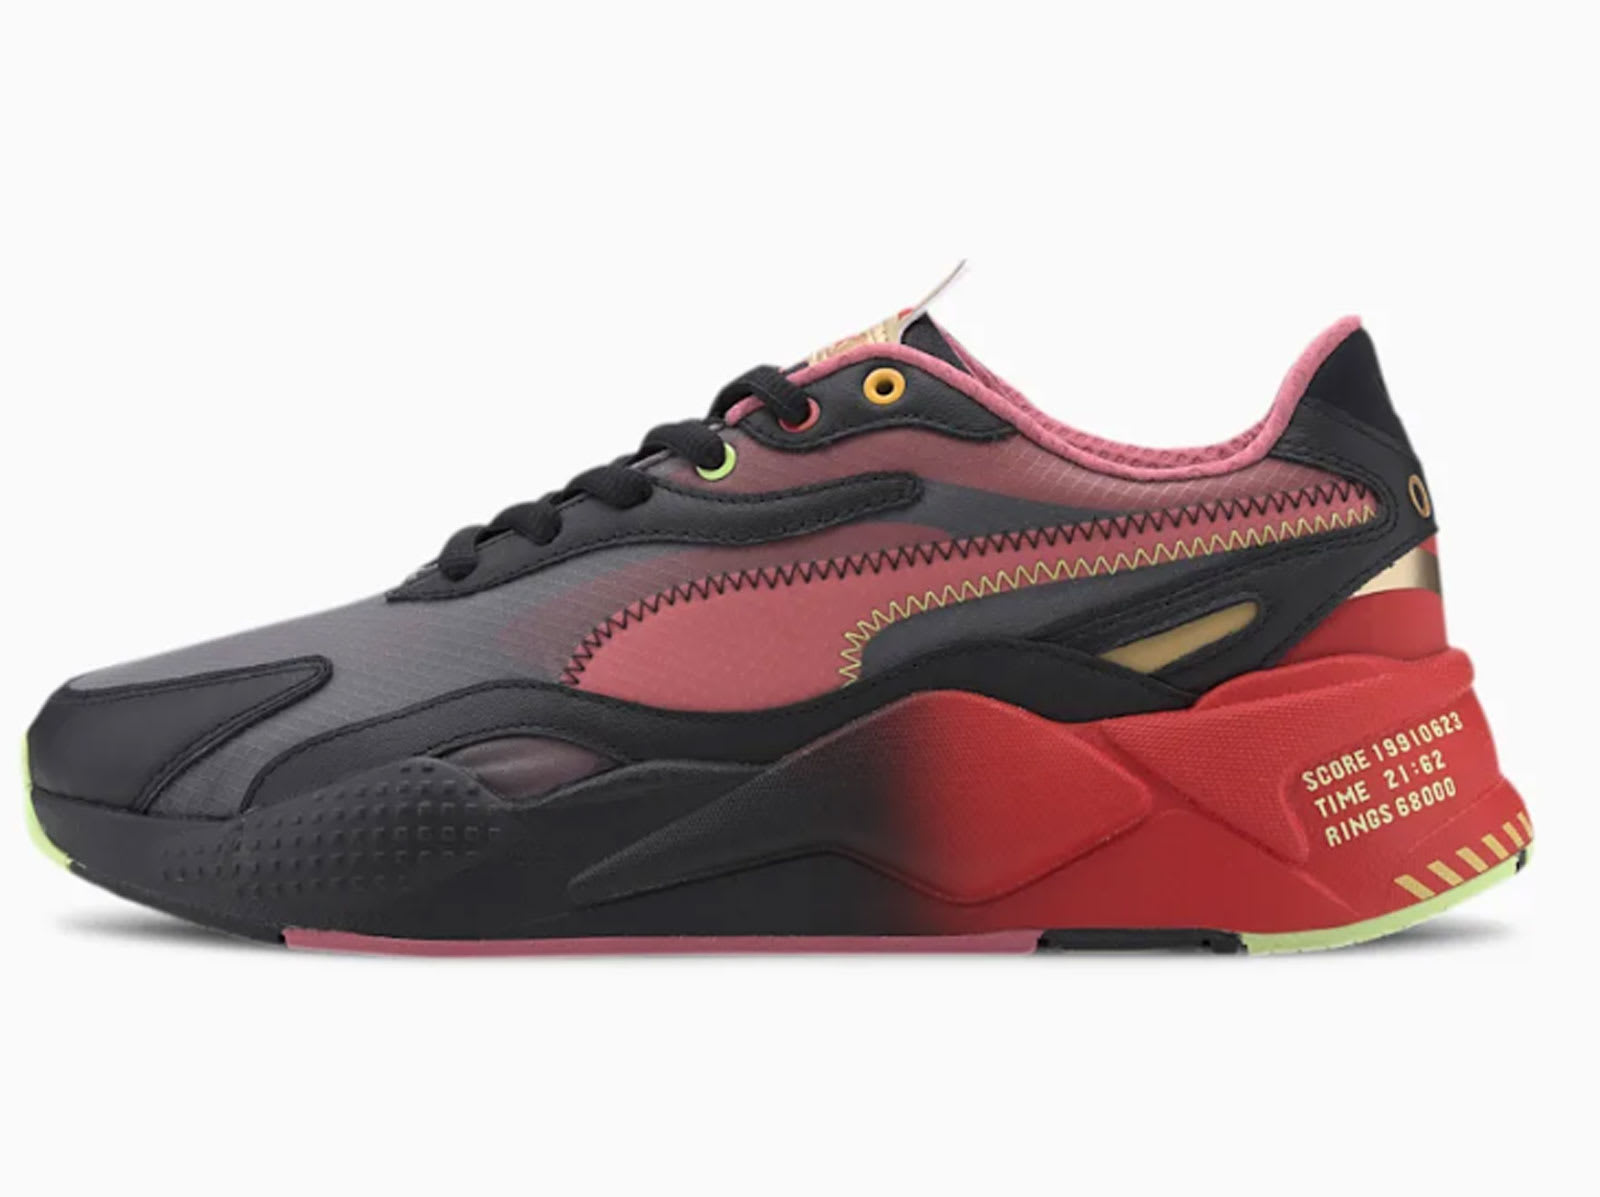 Puma RS-X3 sneakers